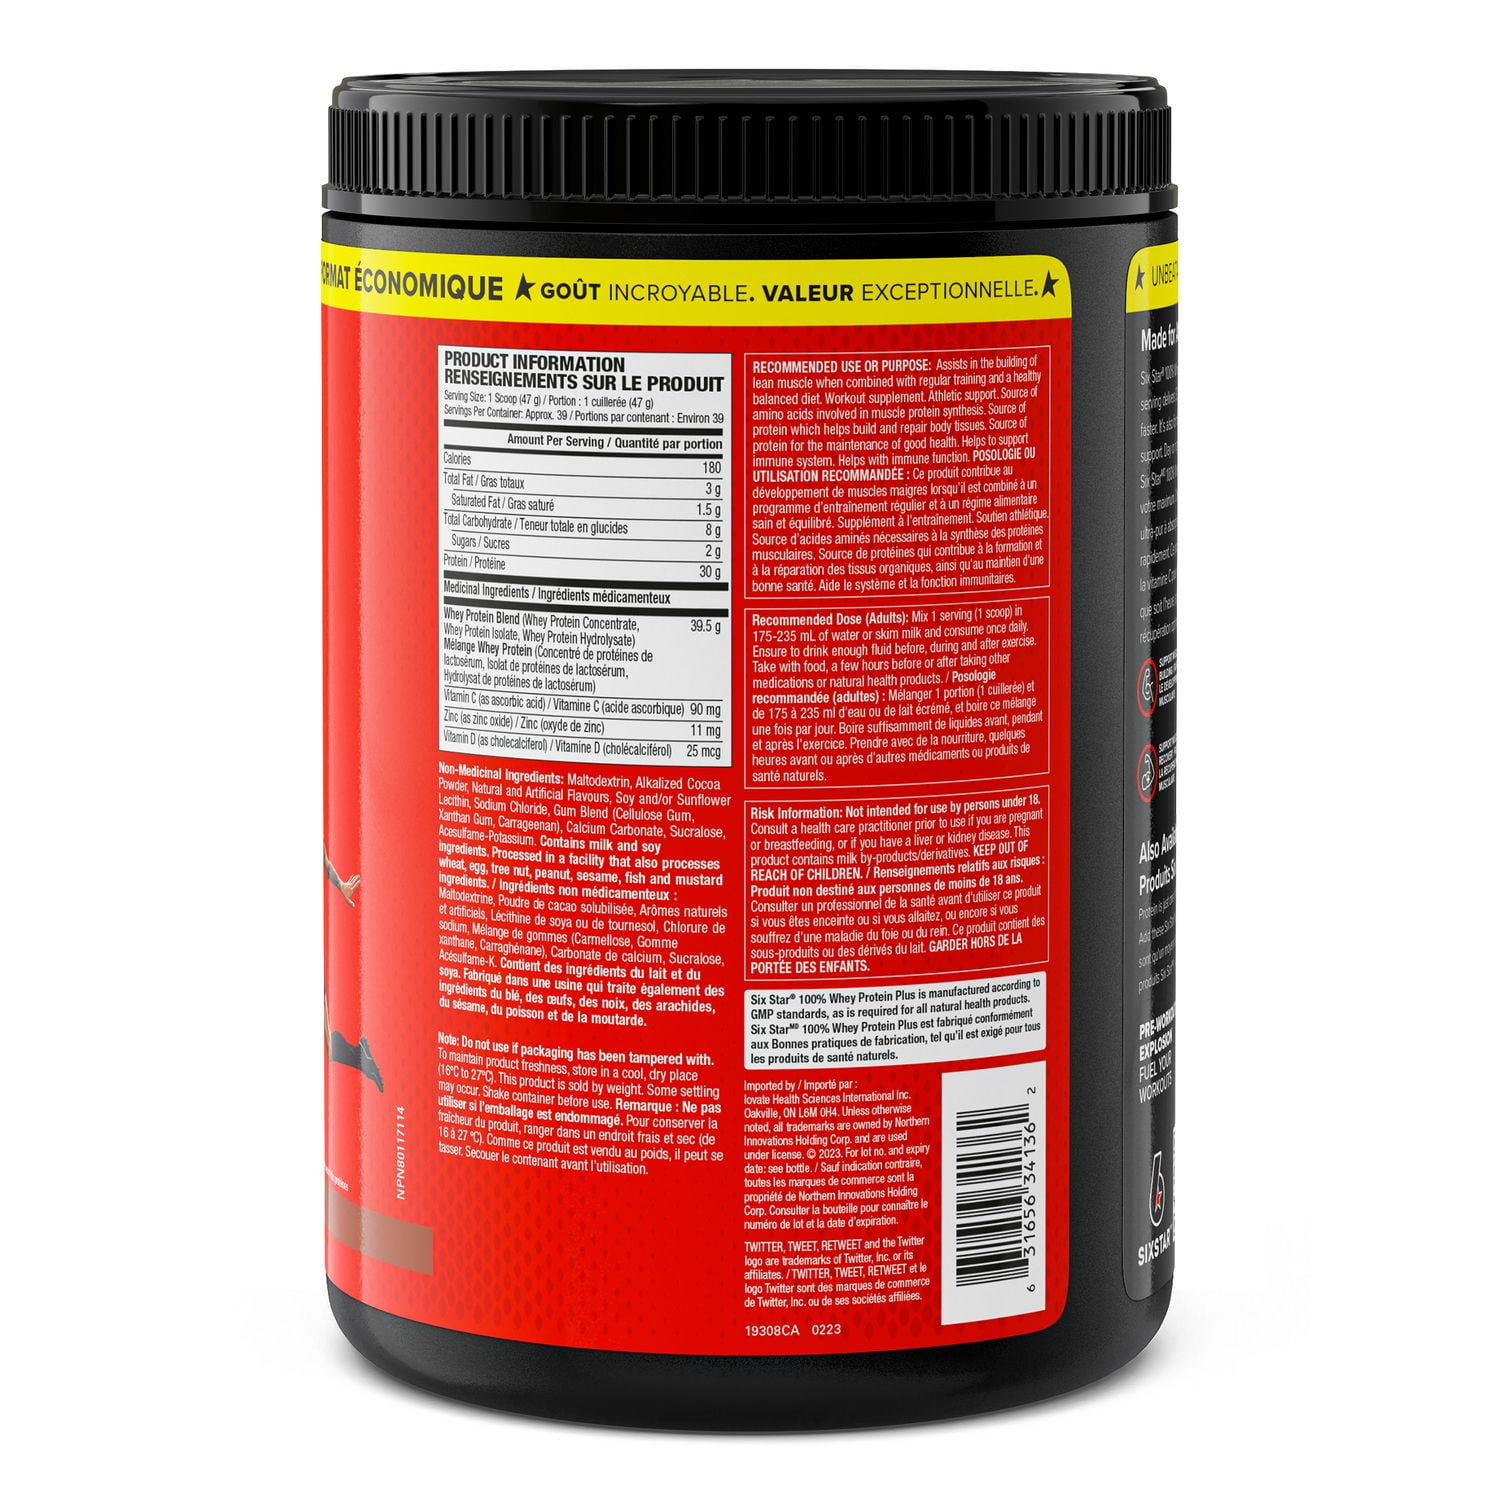 Six Star 100% Whey Protein Plus, Whey Protein Powder, Whey Protein Isolate  & Peptides, Lean Protein Powder for Muscle Gain, Whey Isolate Protein Shake,  Triple Chocolate, 4 lbs, 1.8 kg 